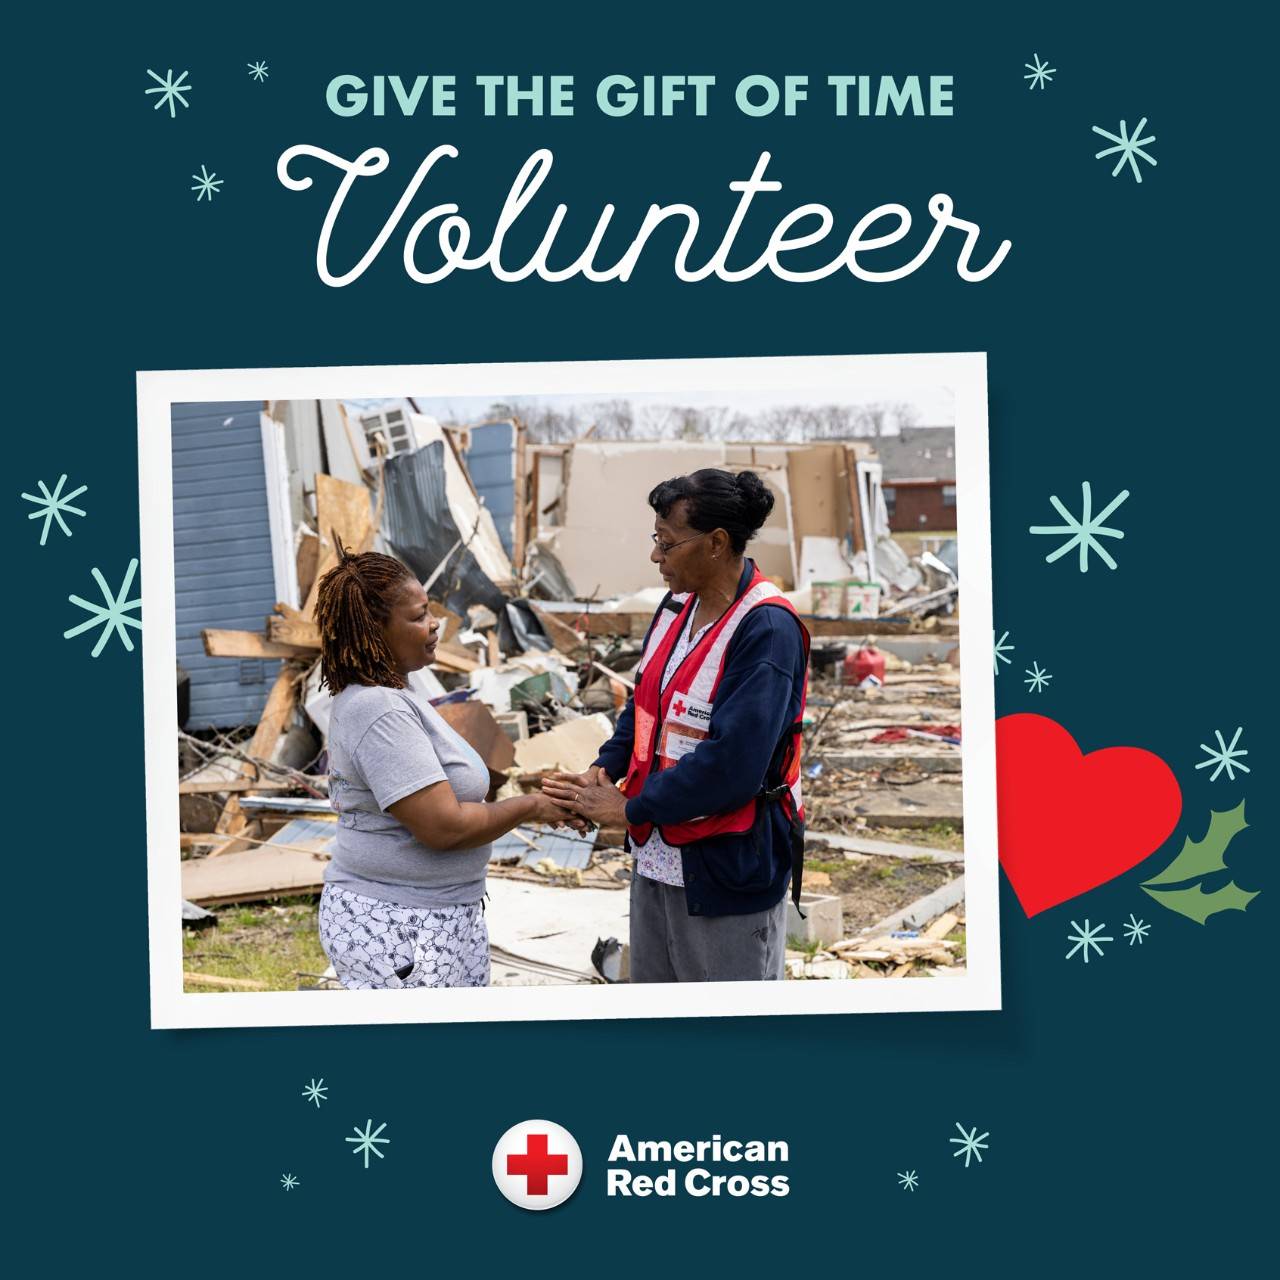 Give the gift of time, volunteer